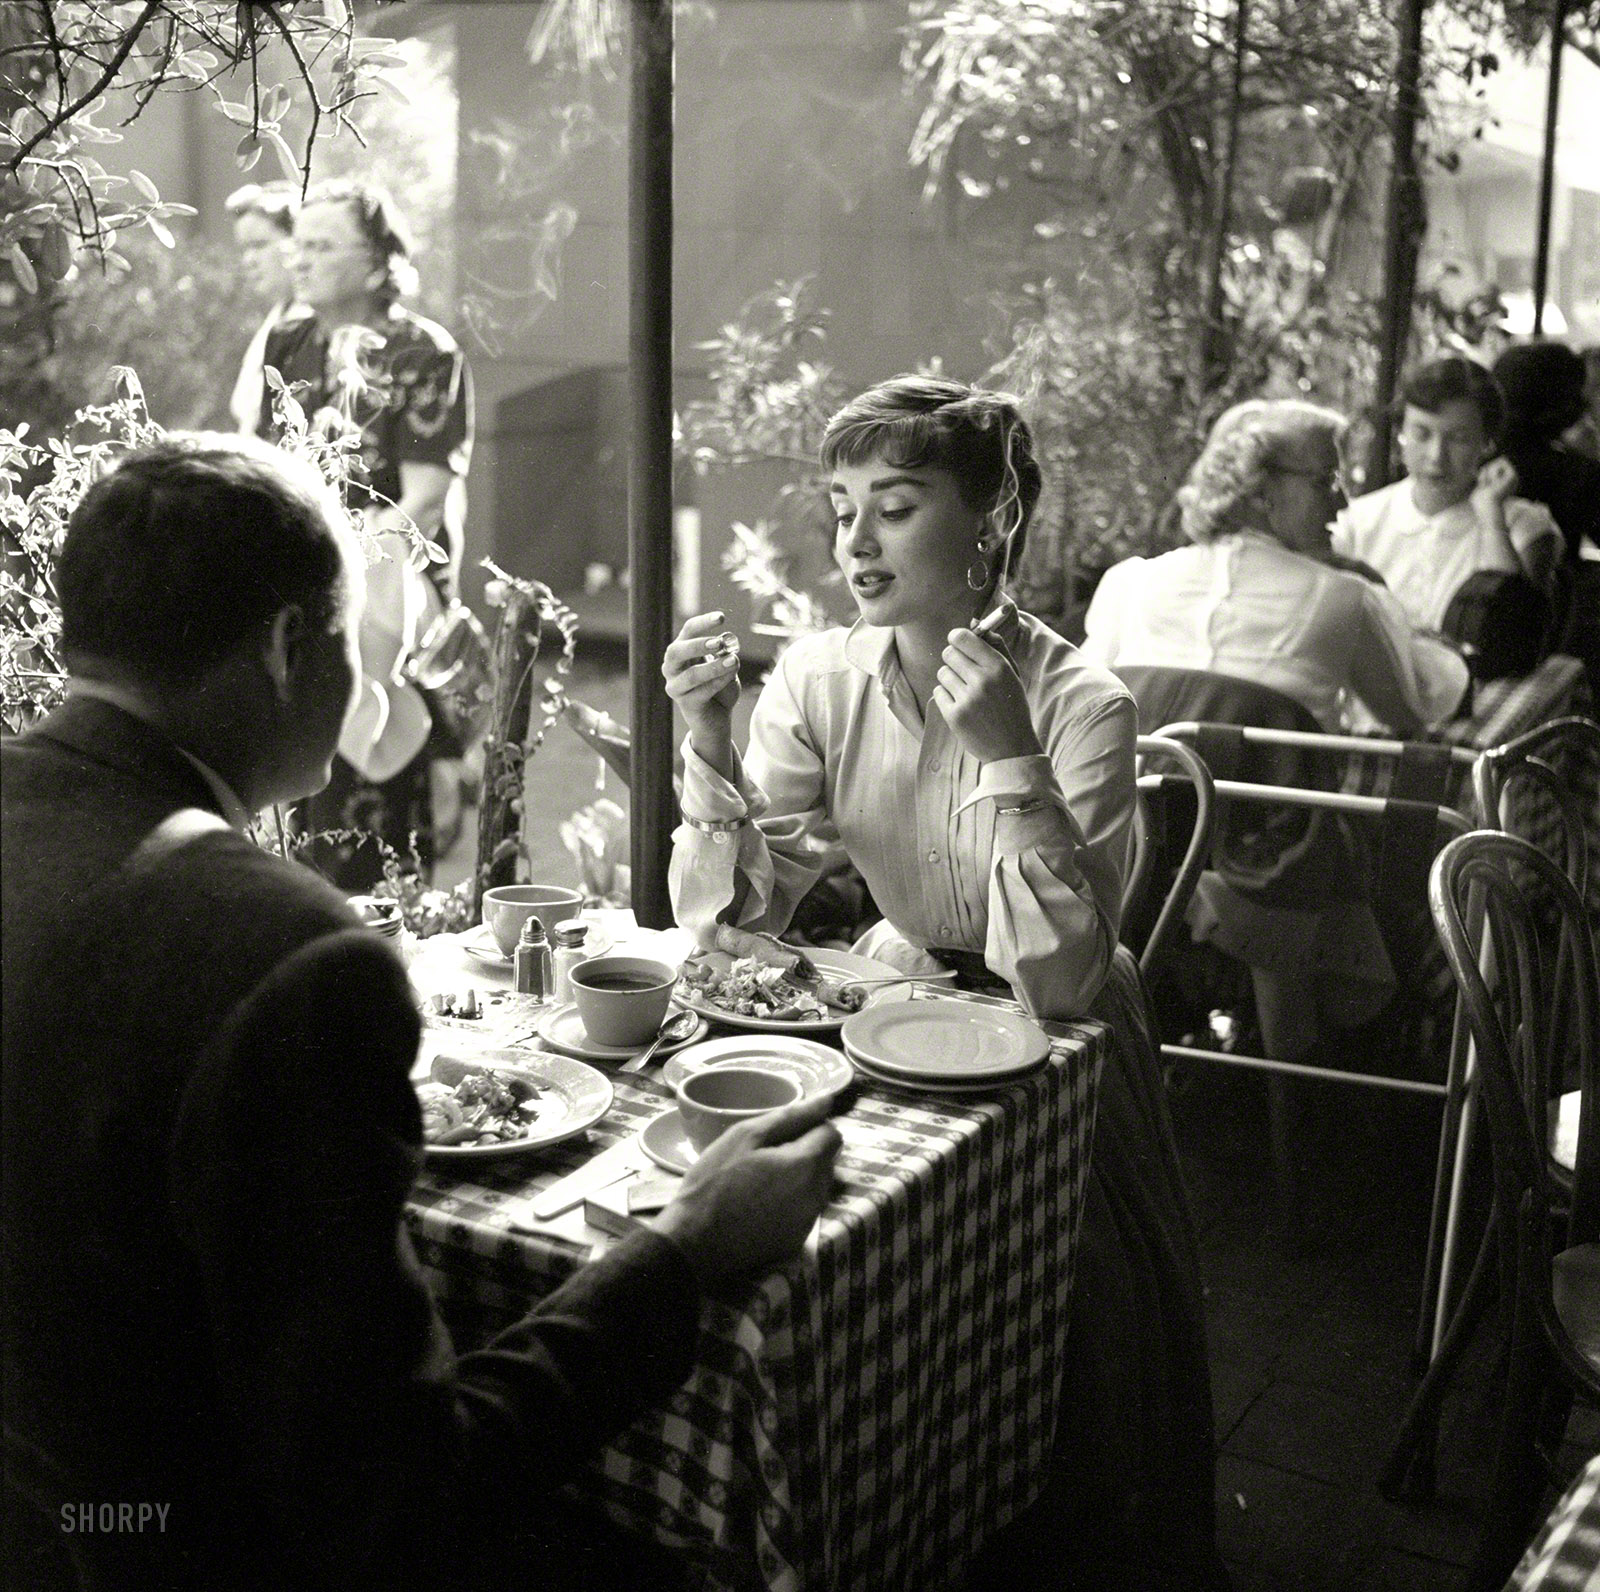 Circa 1953. "Actress Audrey Hepburn with dining companion in Mexico." From photos by Earl Theisen for Look magazine. View full size.